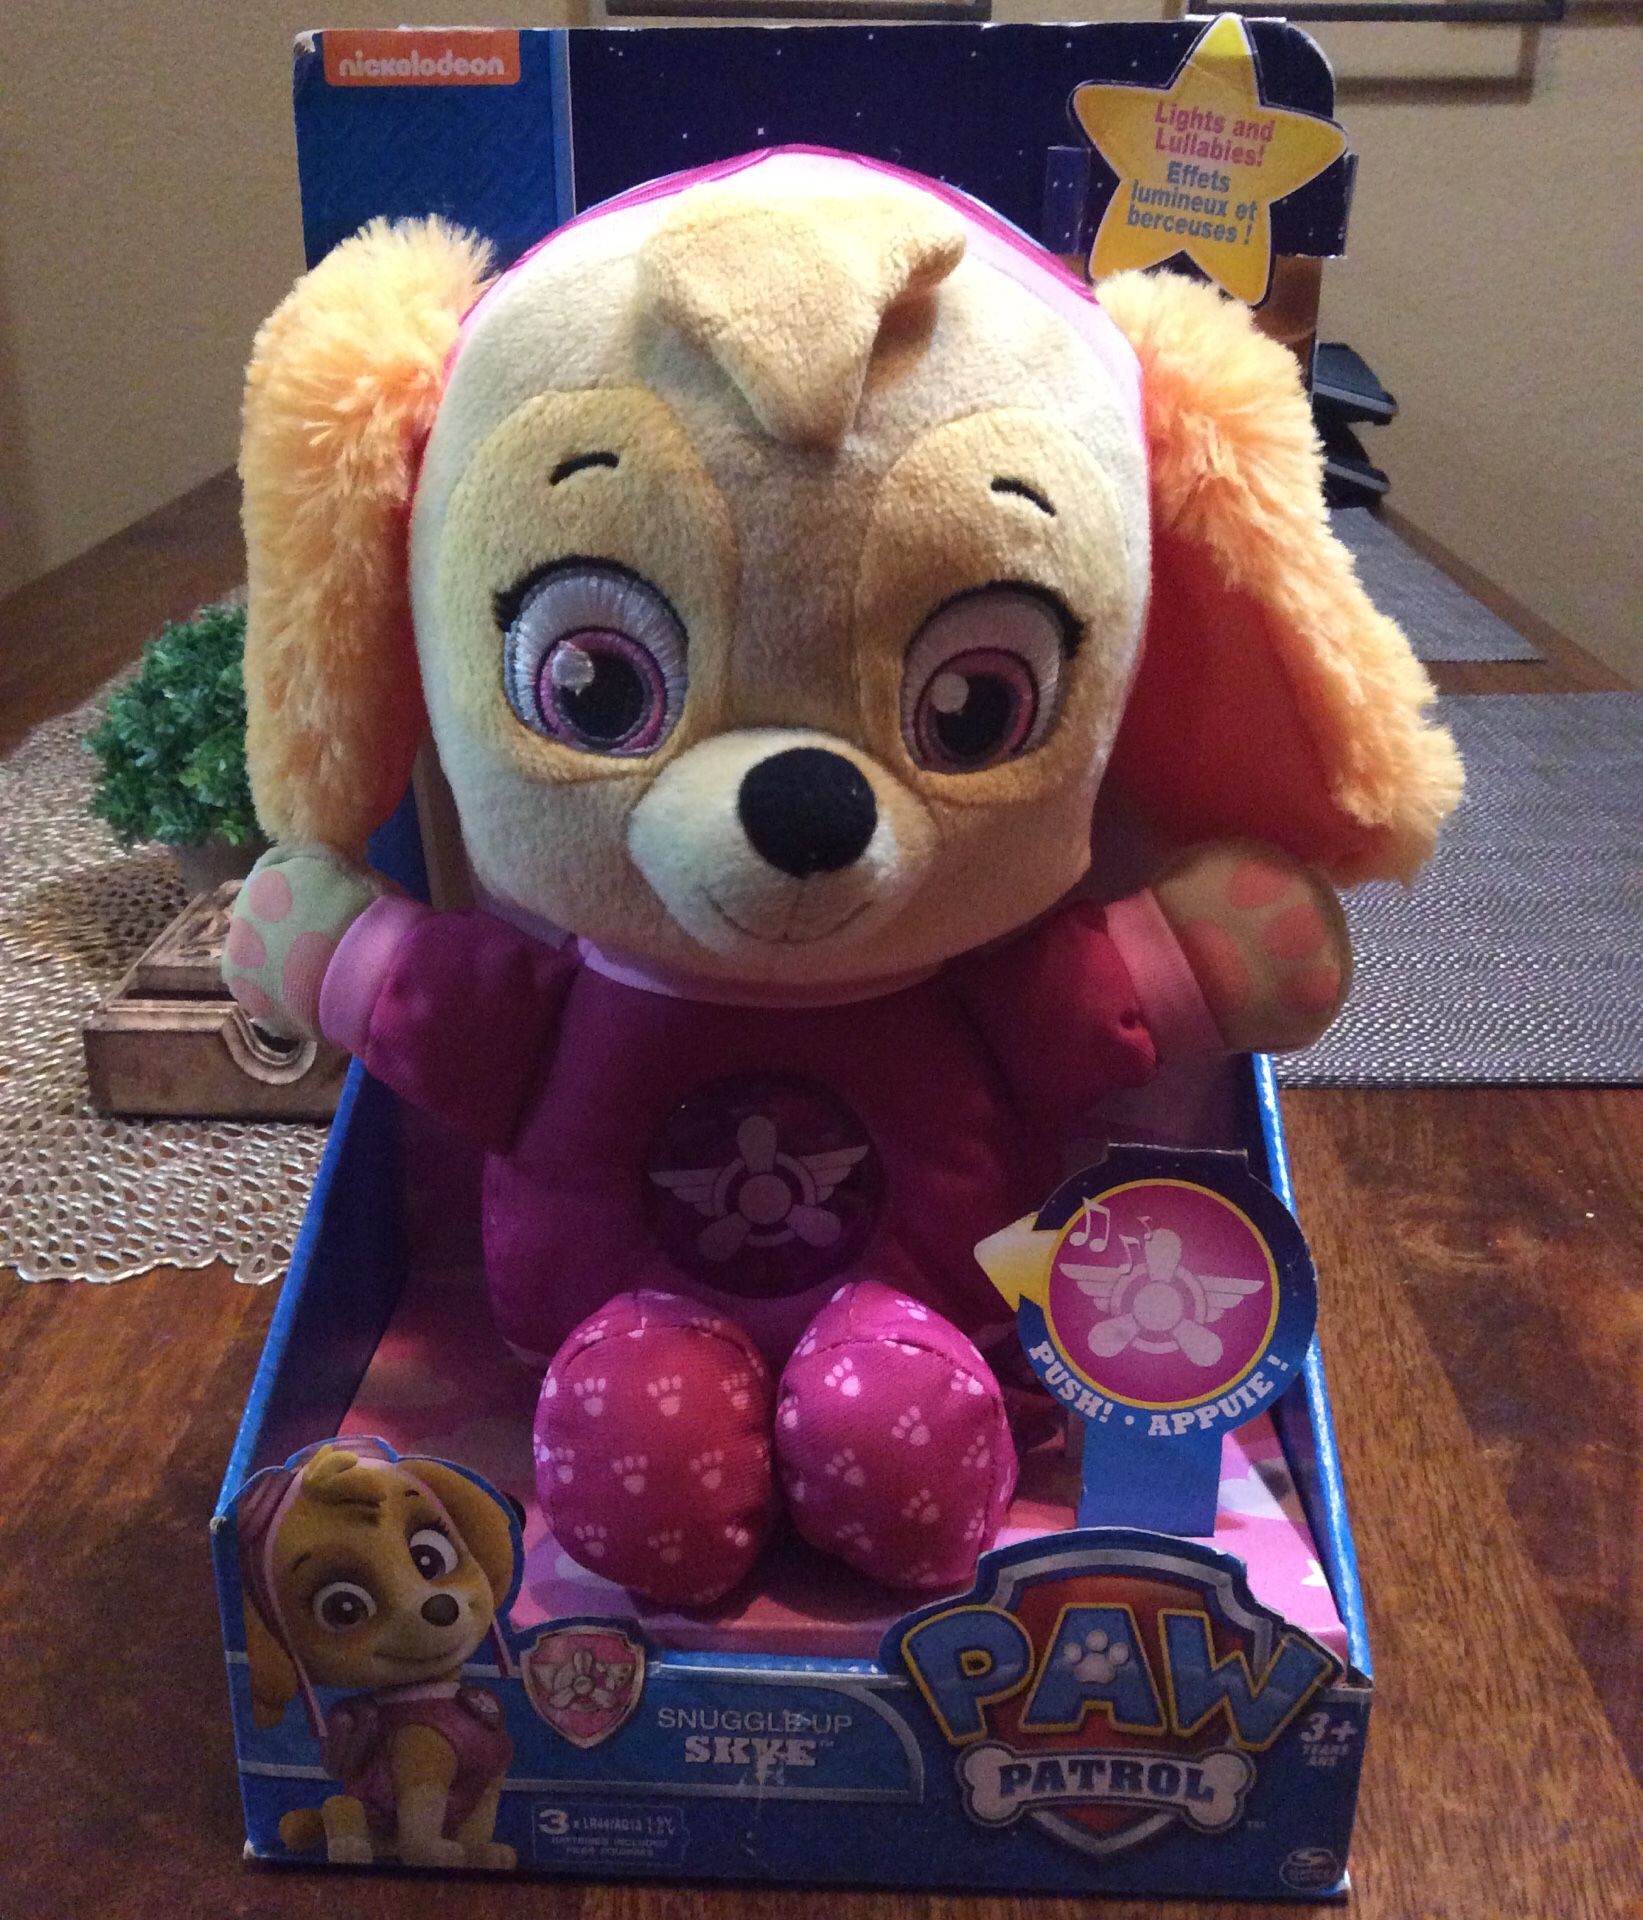 Paw Patrol Skye stuffed animal, sings and lights up. Note it requires new batteries